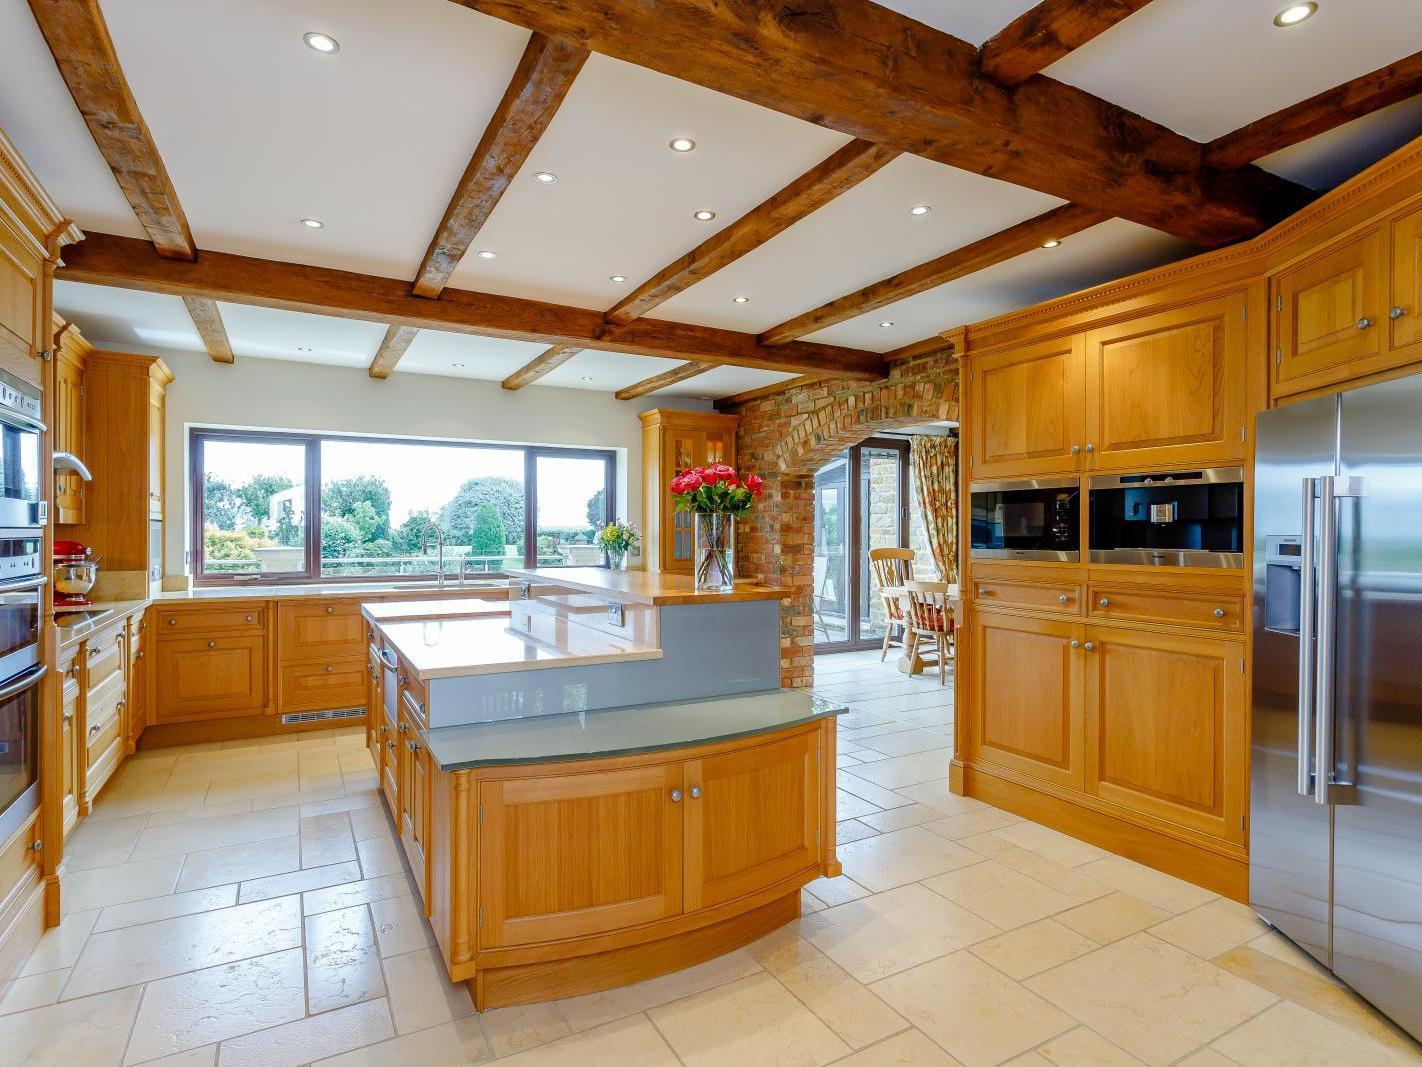 The kitchen is complete with an island. Photo: Fine and Country.